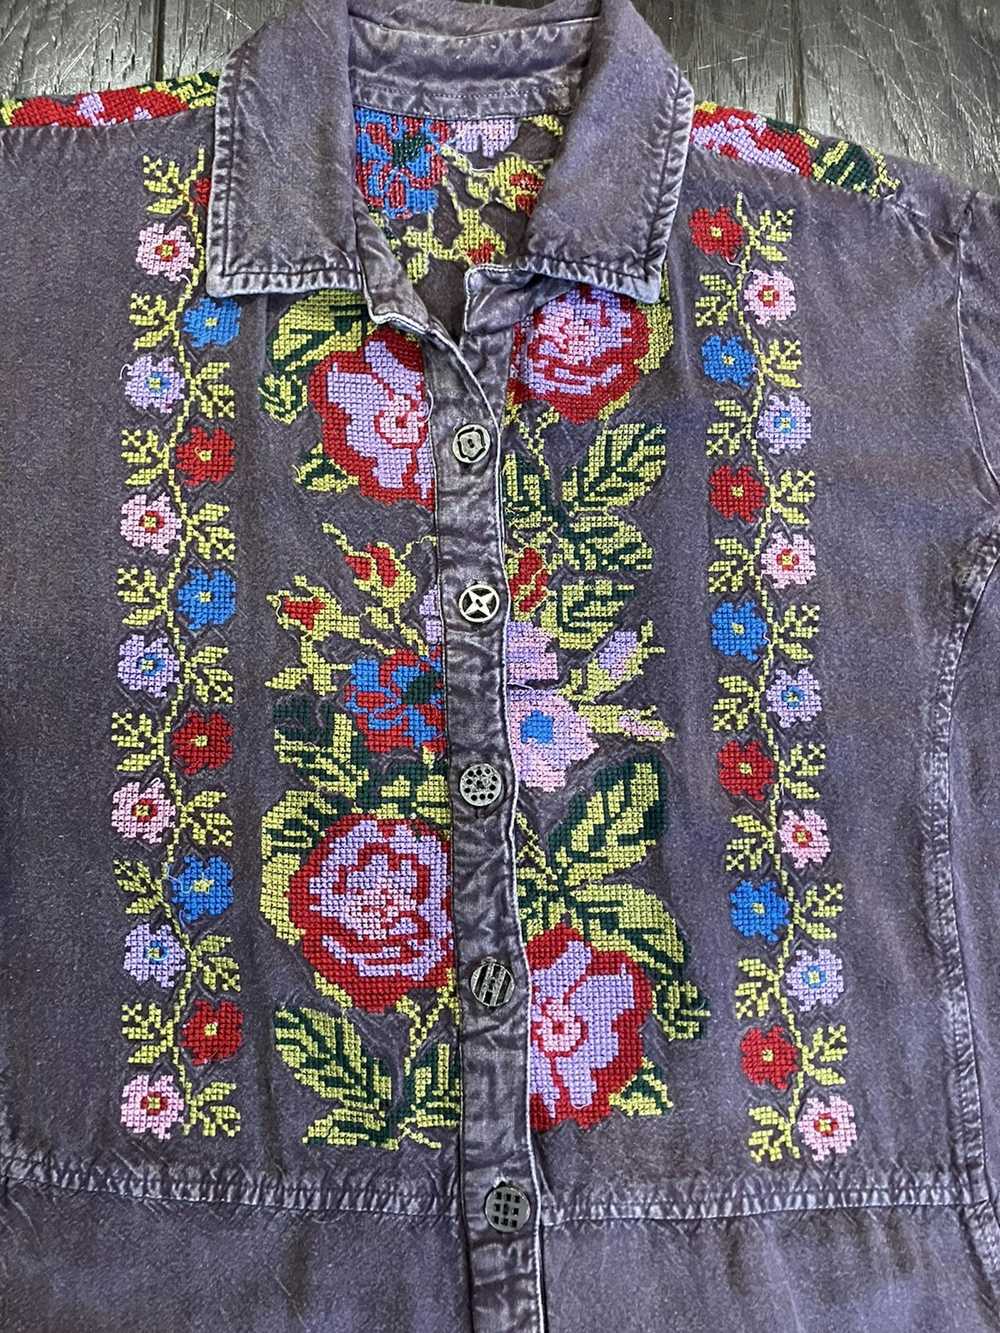 Streetwear × Vintage Cross stitched, flowers shirt - image 4